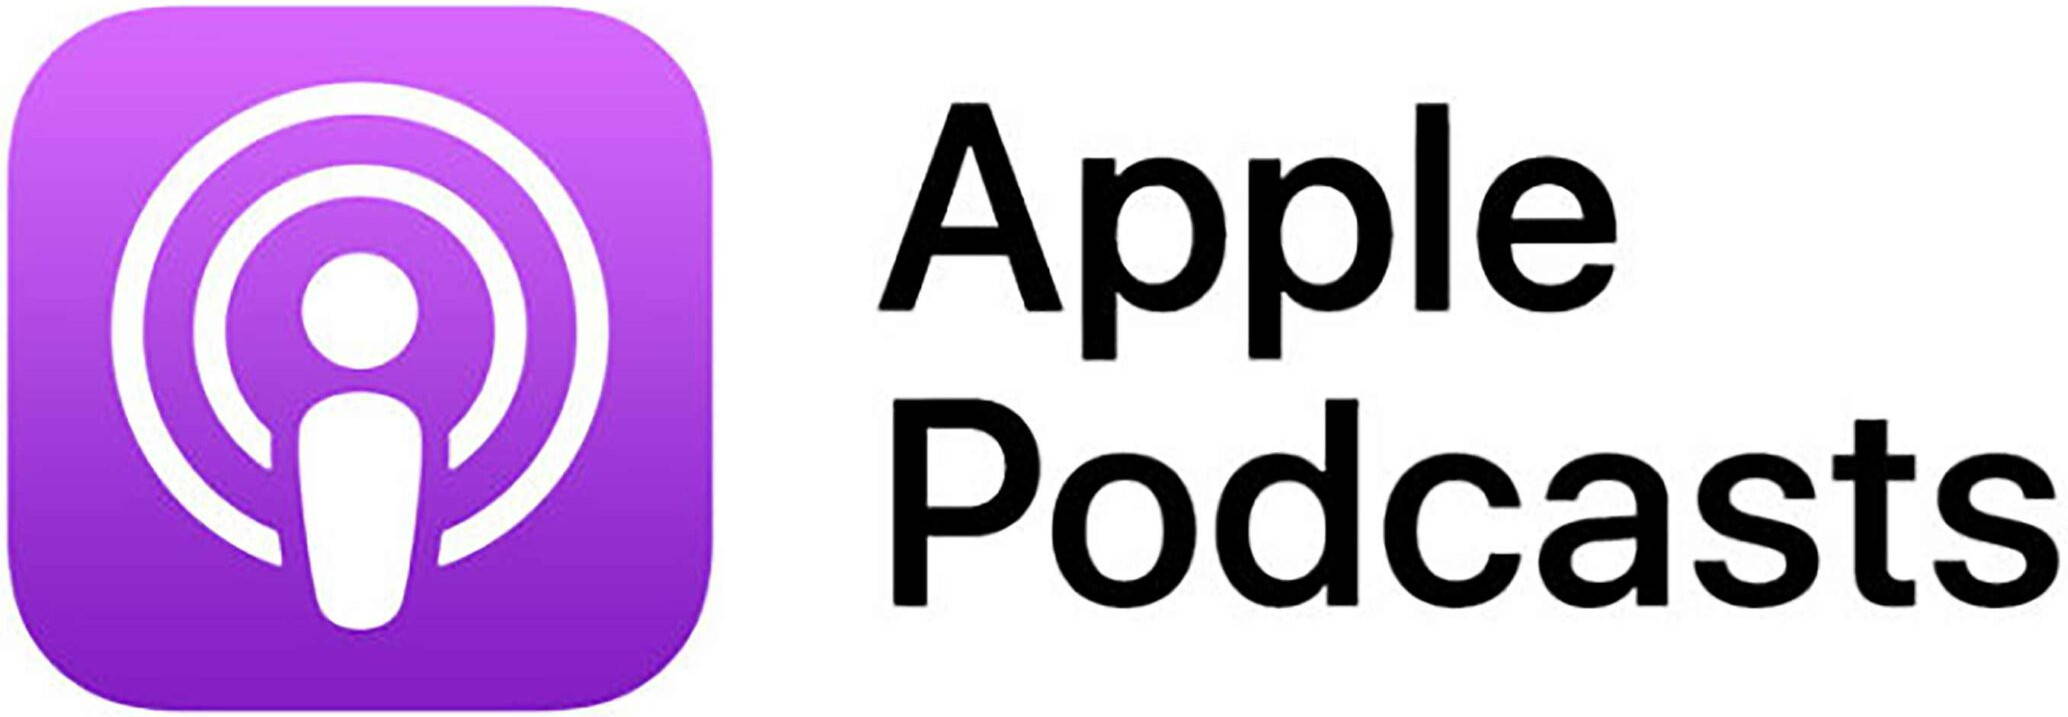 Apple Podcasts logo that will direct to the Interview with Maxwell and Geraldine's founders Kate and Beth